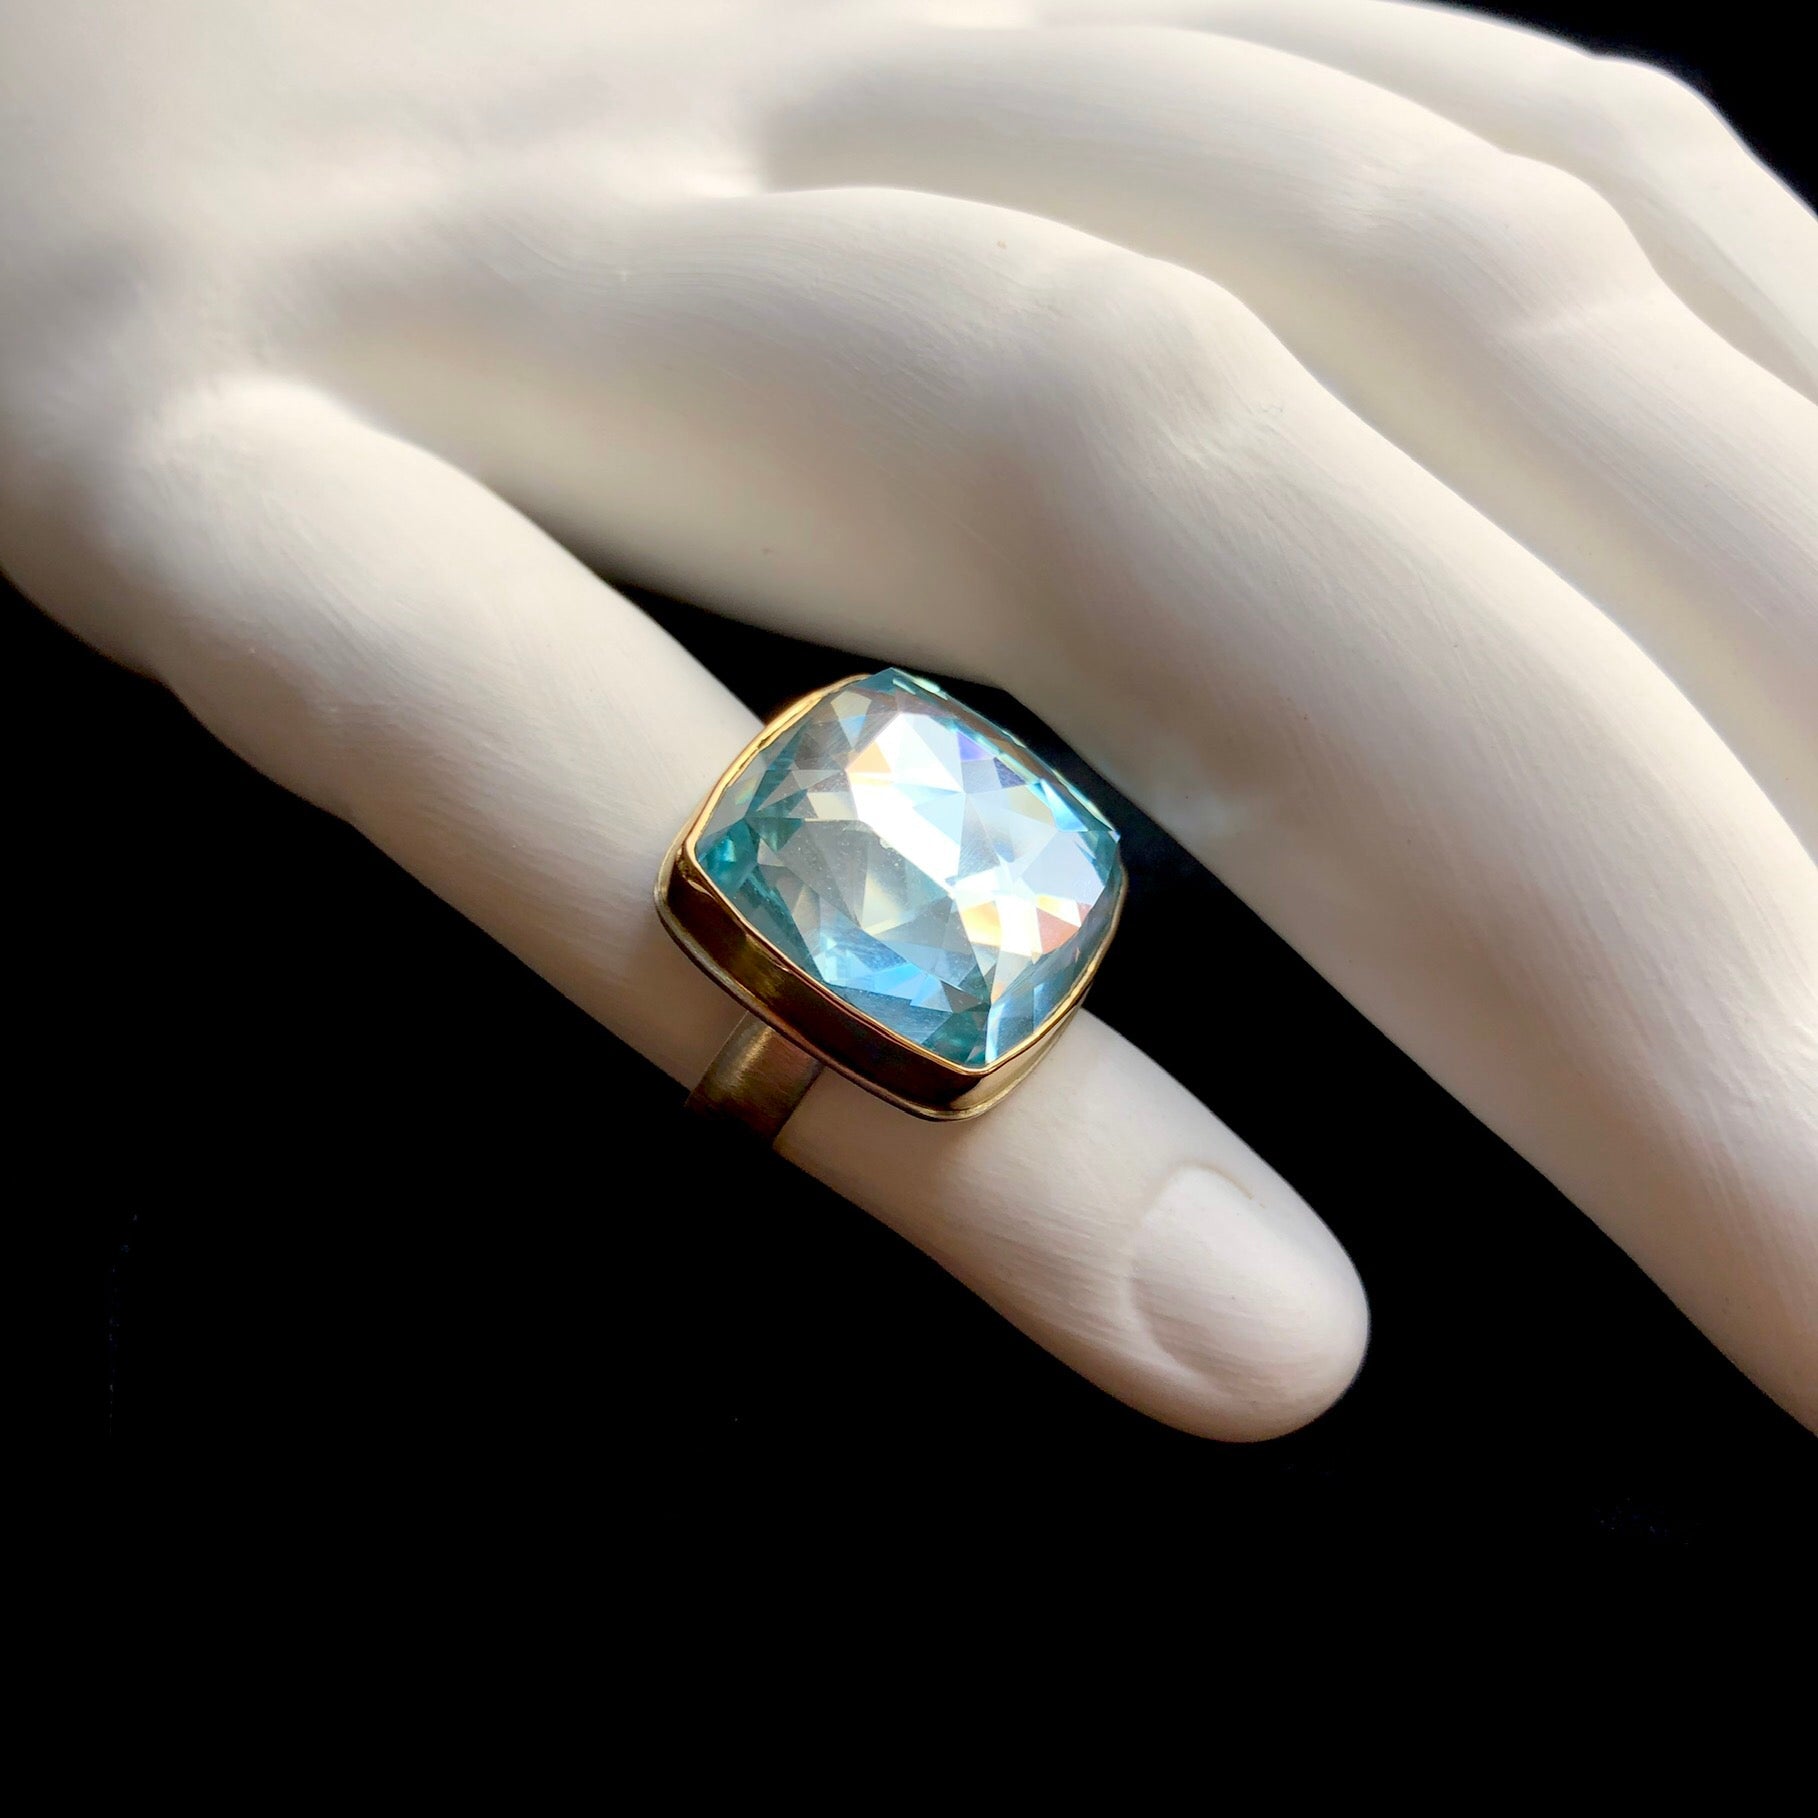 Side profile view of Blue Topaz Ring with gold setting and band on white ceramic finger